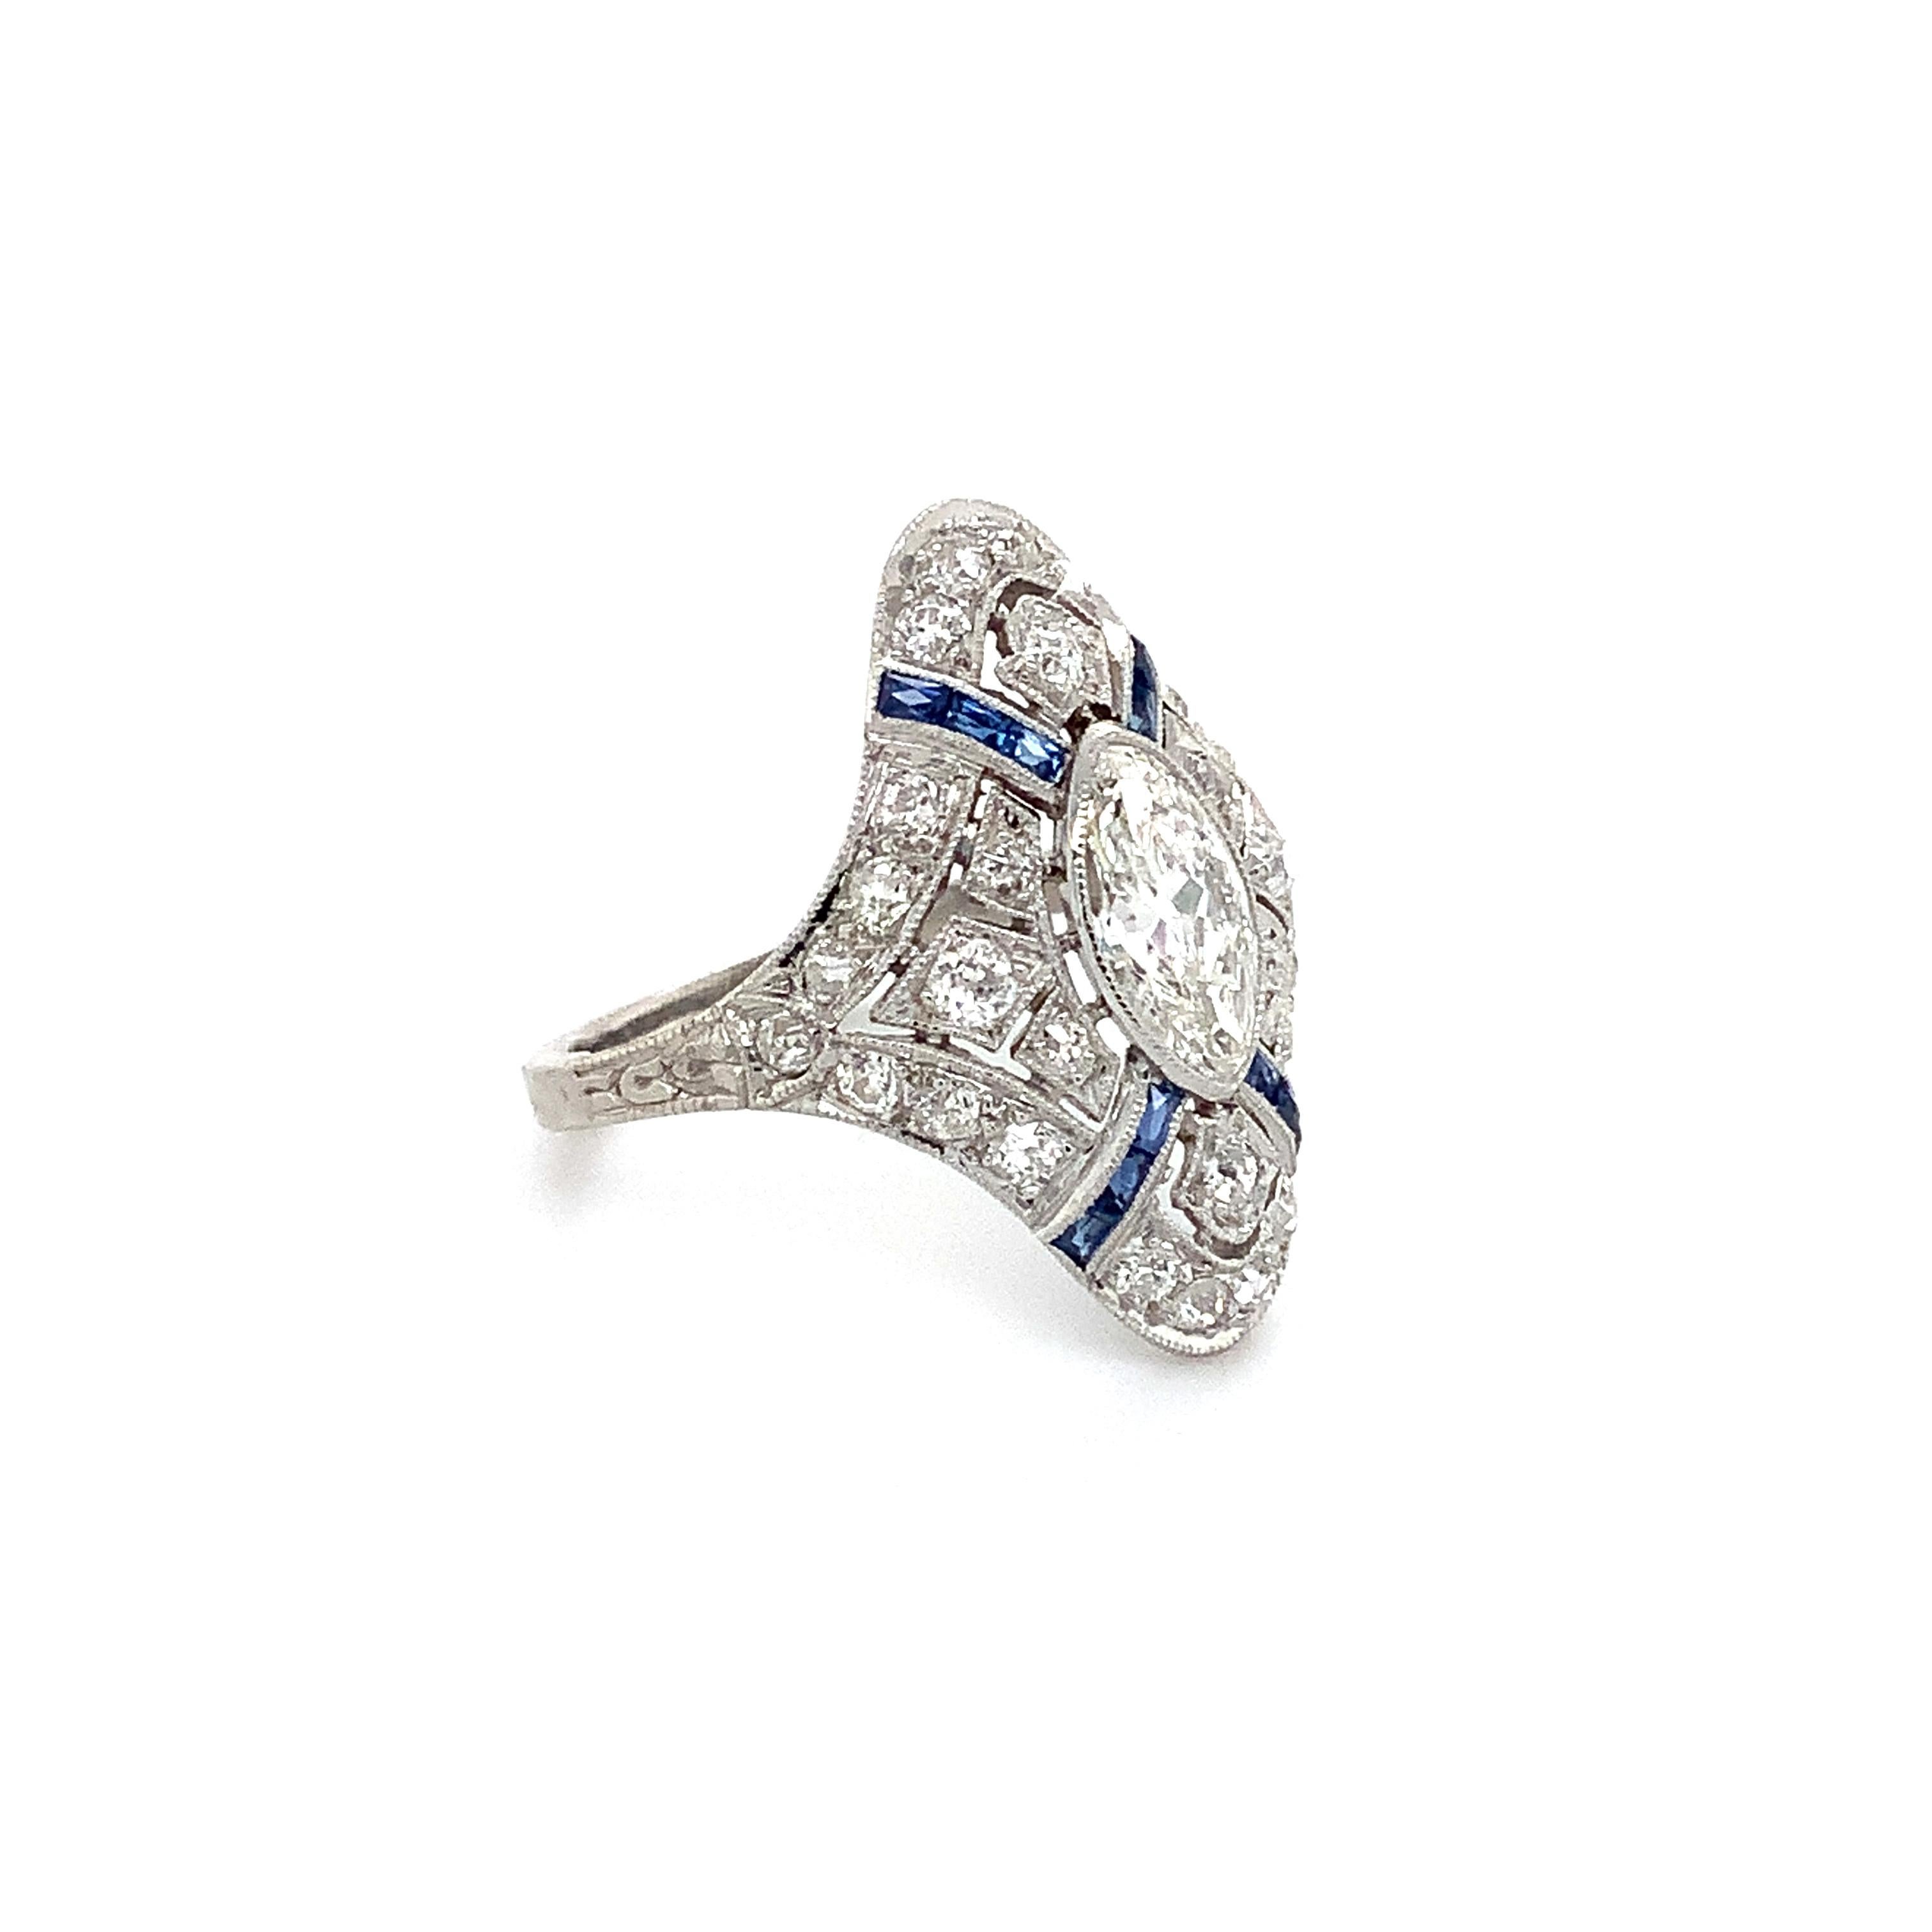 Women's Antique Edwardian, Art Deco Filigree Marquise Diamond and Caliber Sapphire Ring For Sale